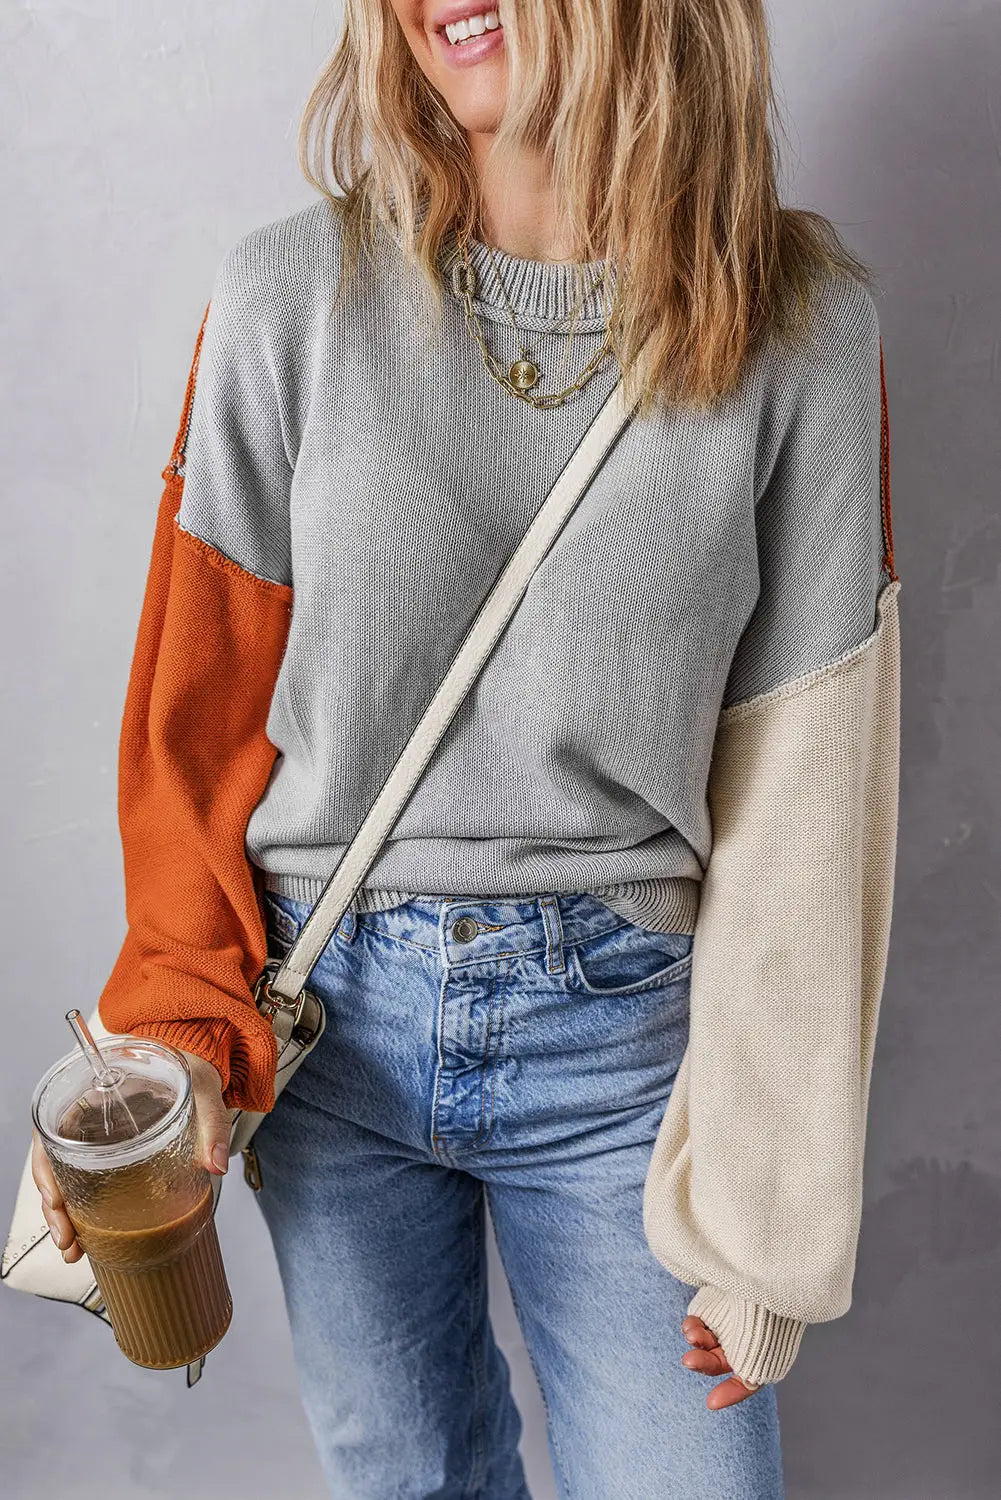 Chicory coffee color block exposed seam loose fit sweater - tops